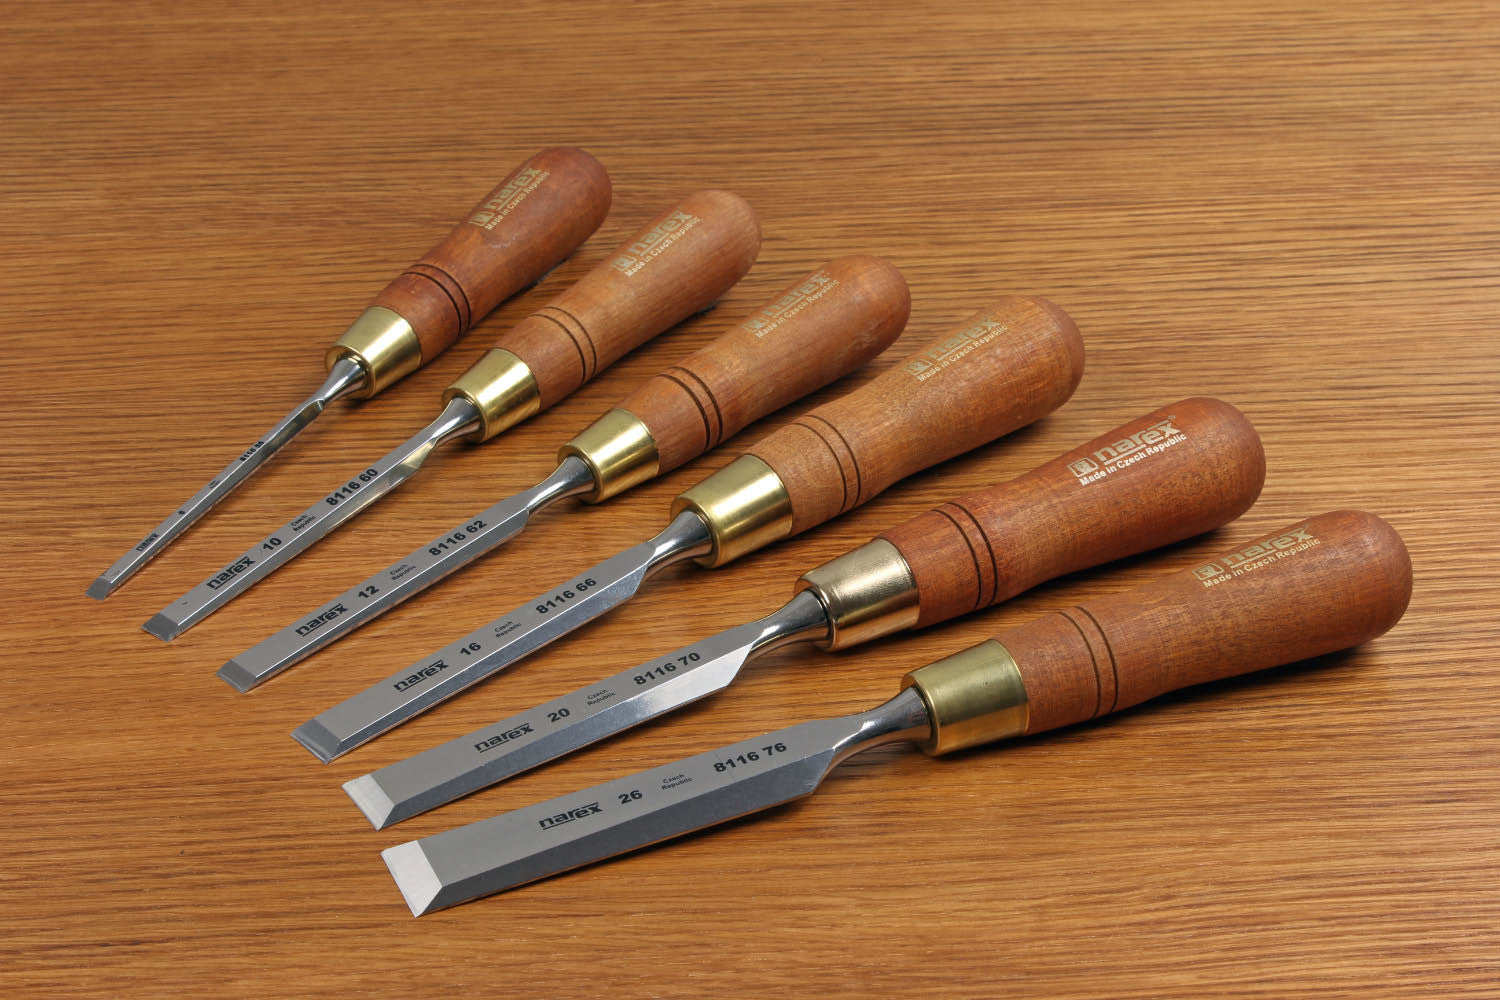 Thin woodworking chisels